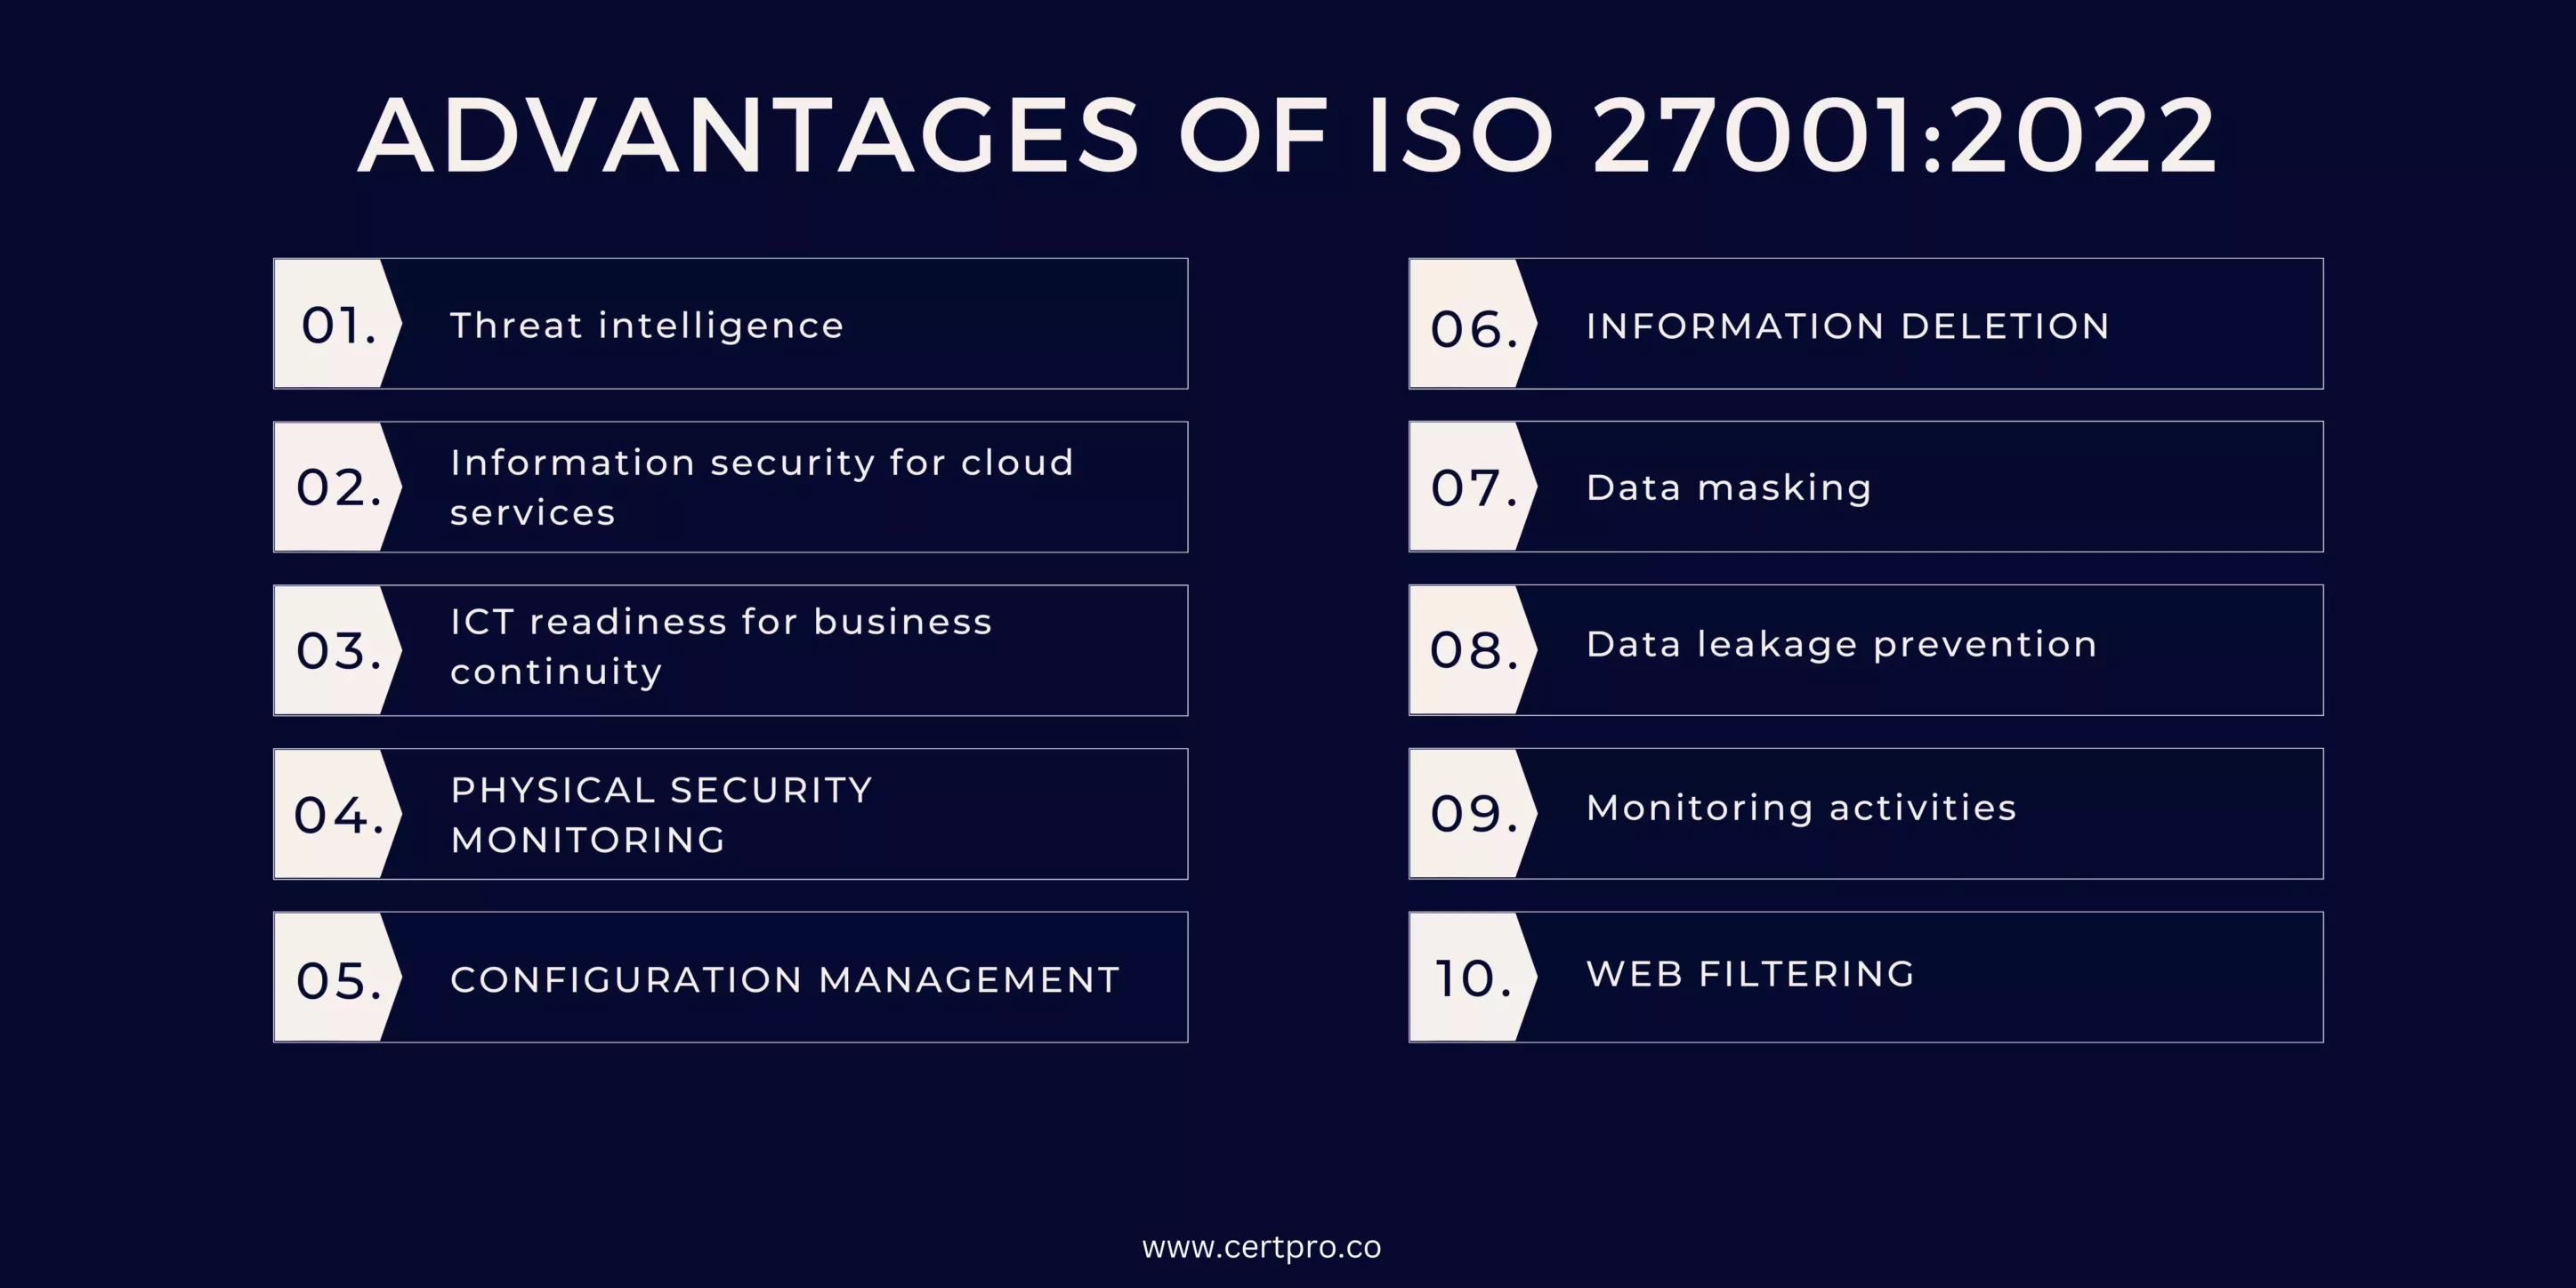 ADVANTAGES OF ISO 27001